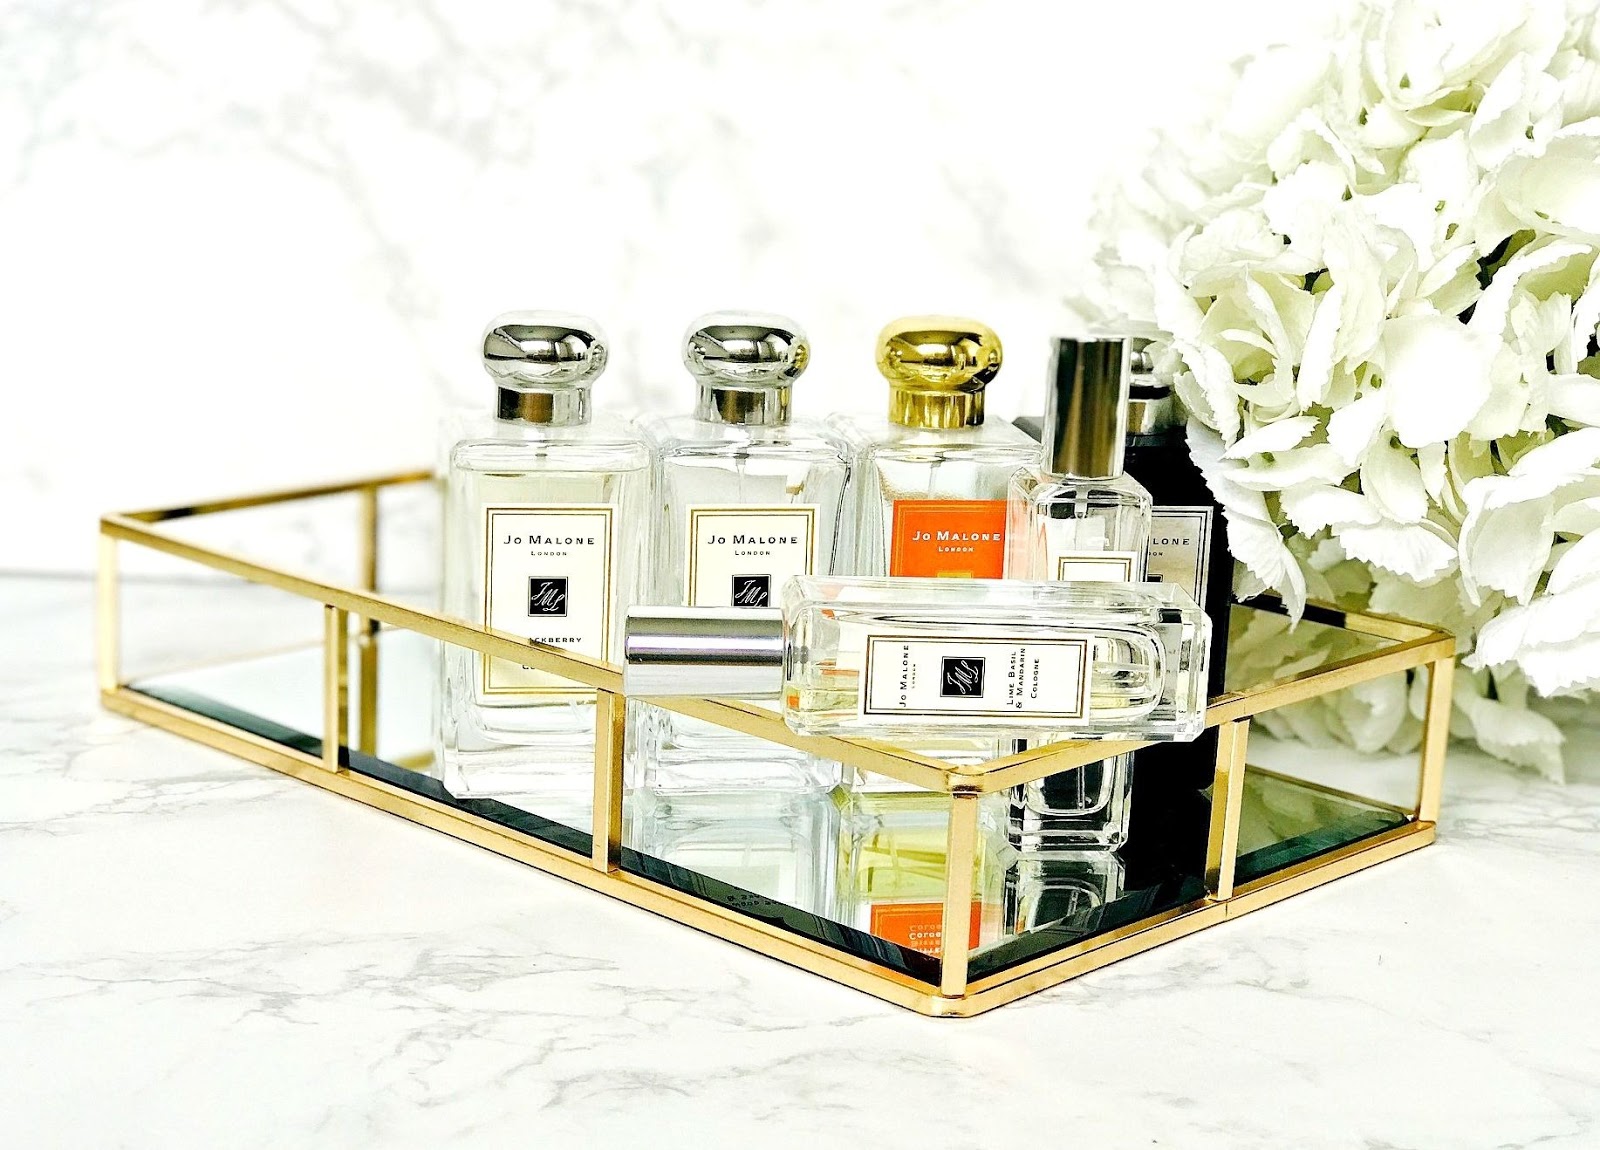 The hype is real, Jo Malone, Is Jo Malone worth the hype